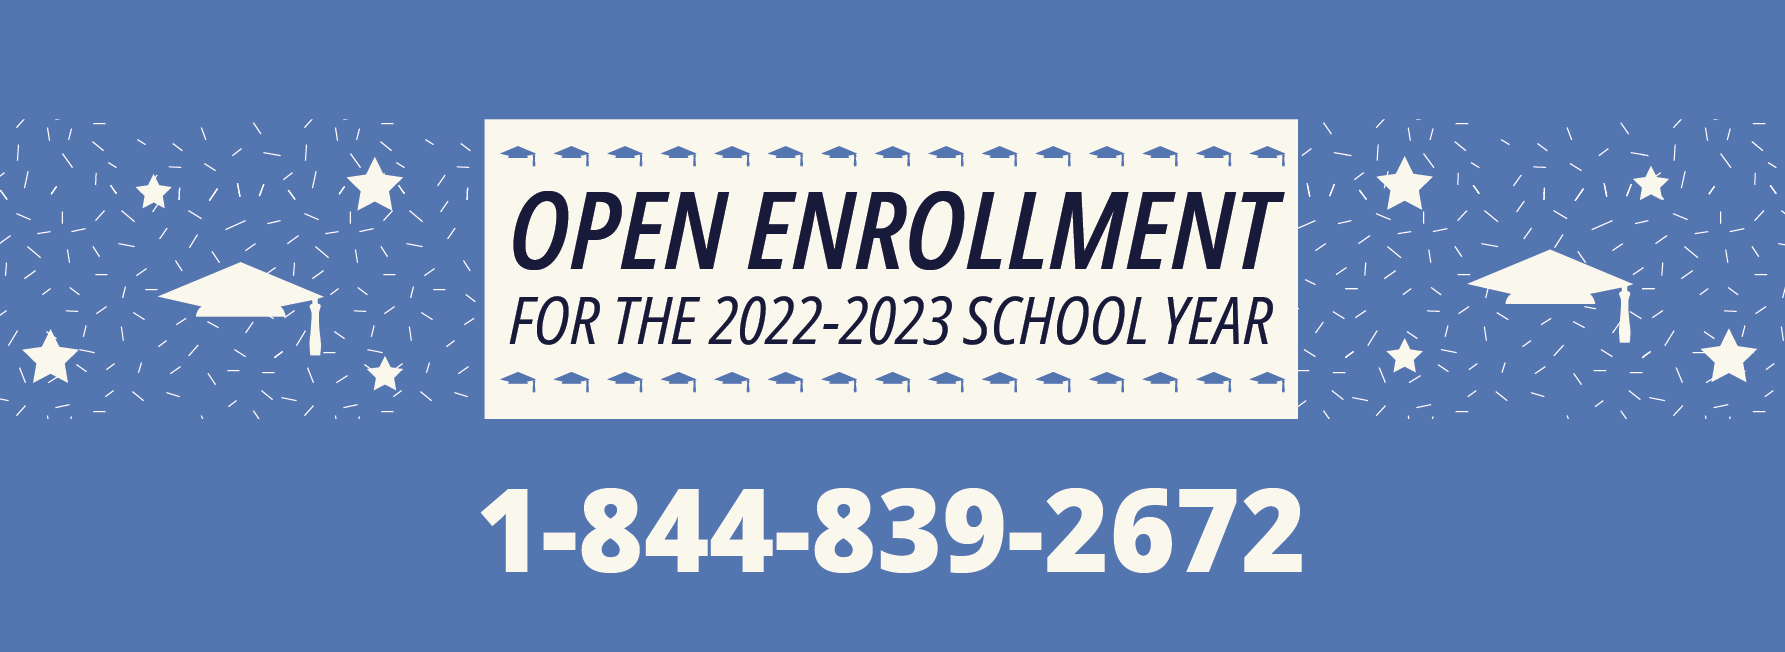 Open Enrollment for the 2022-2023 School Year 1-844-839-2672